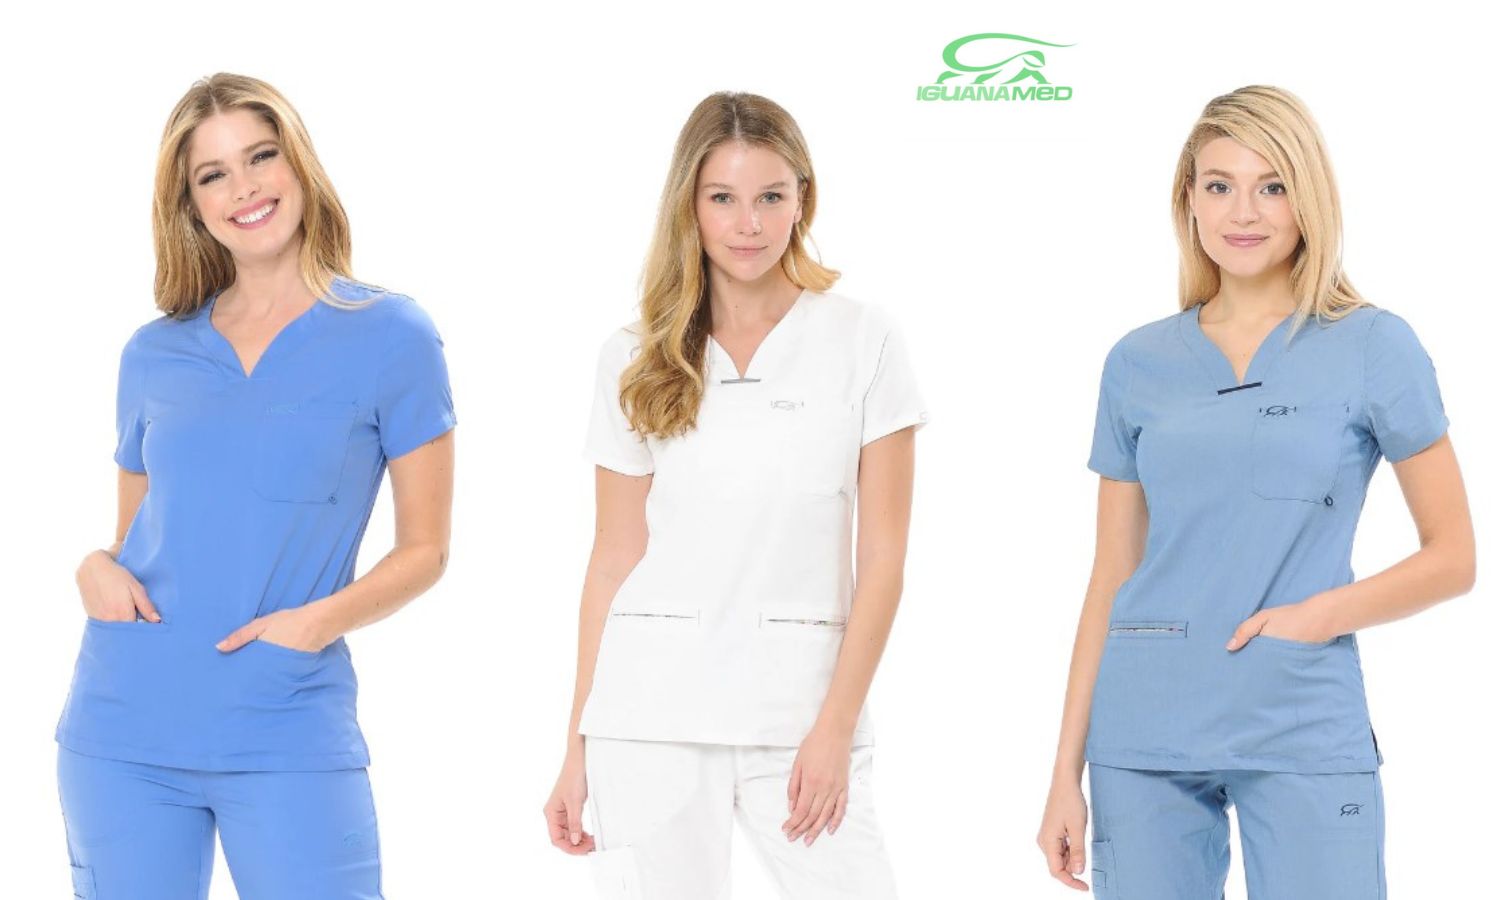 How to Find Sustainable Figs Scrub Tops for Women?